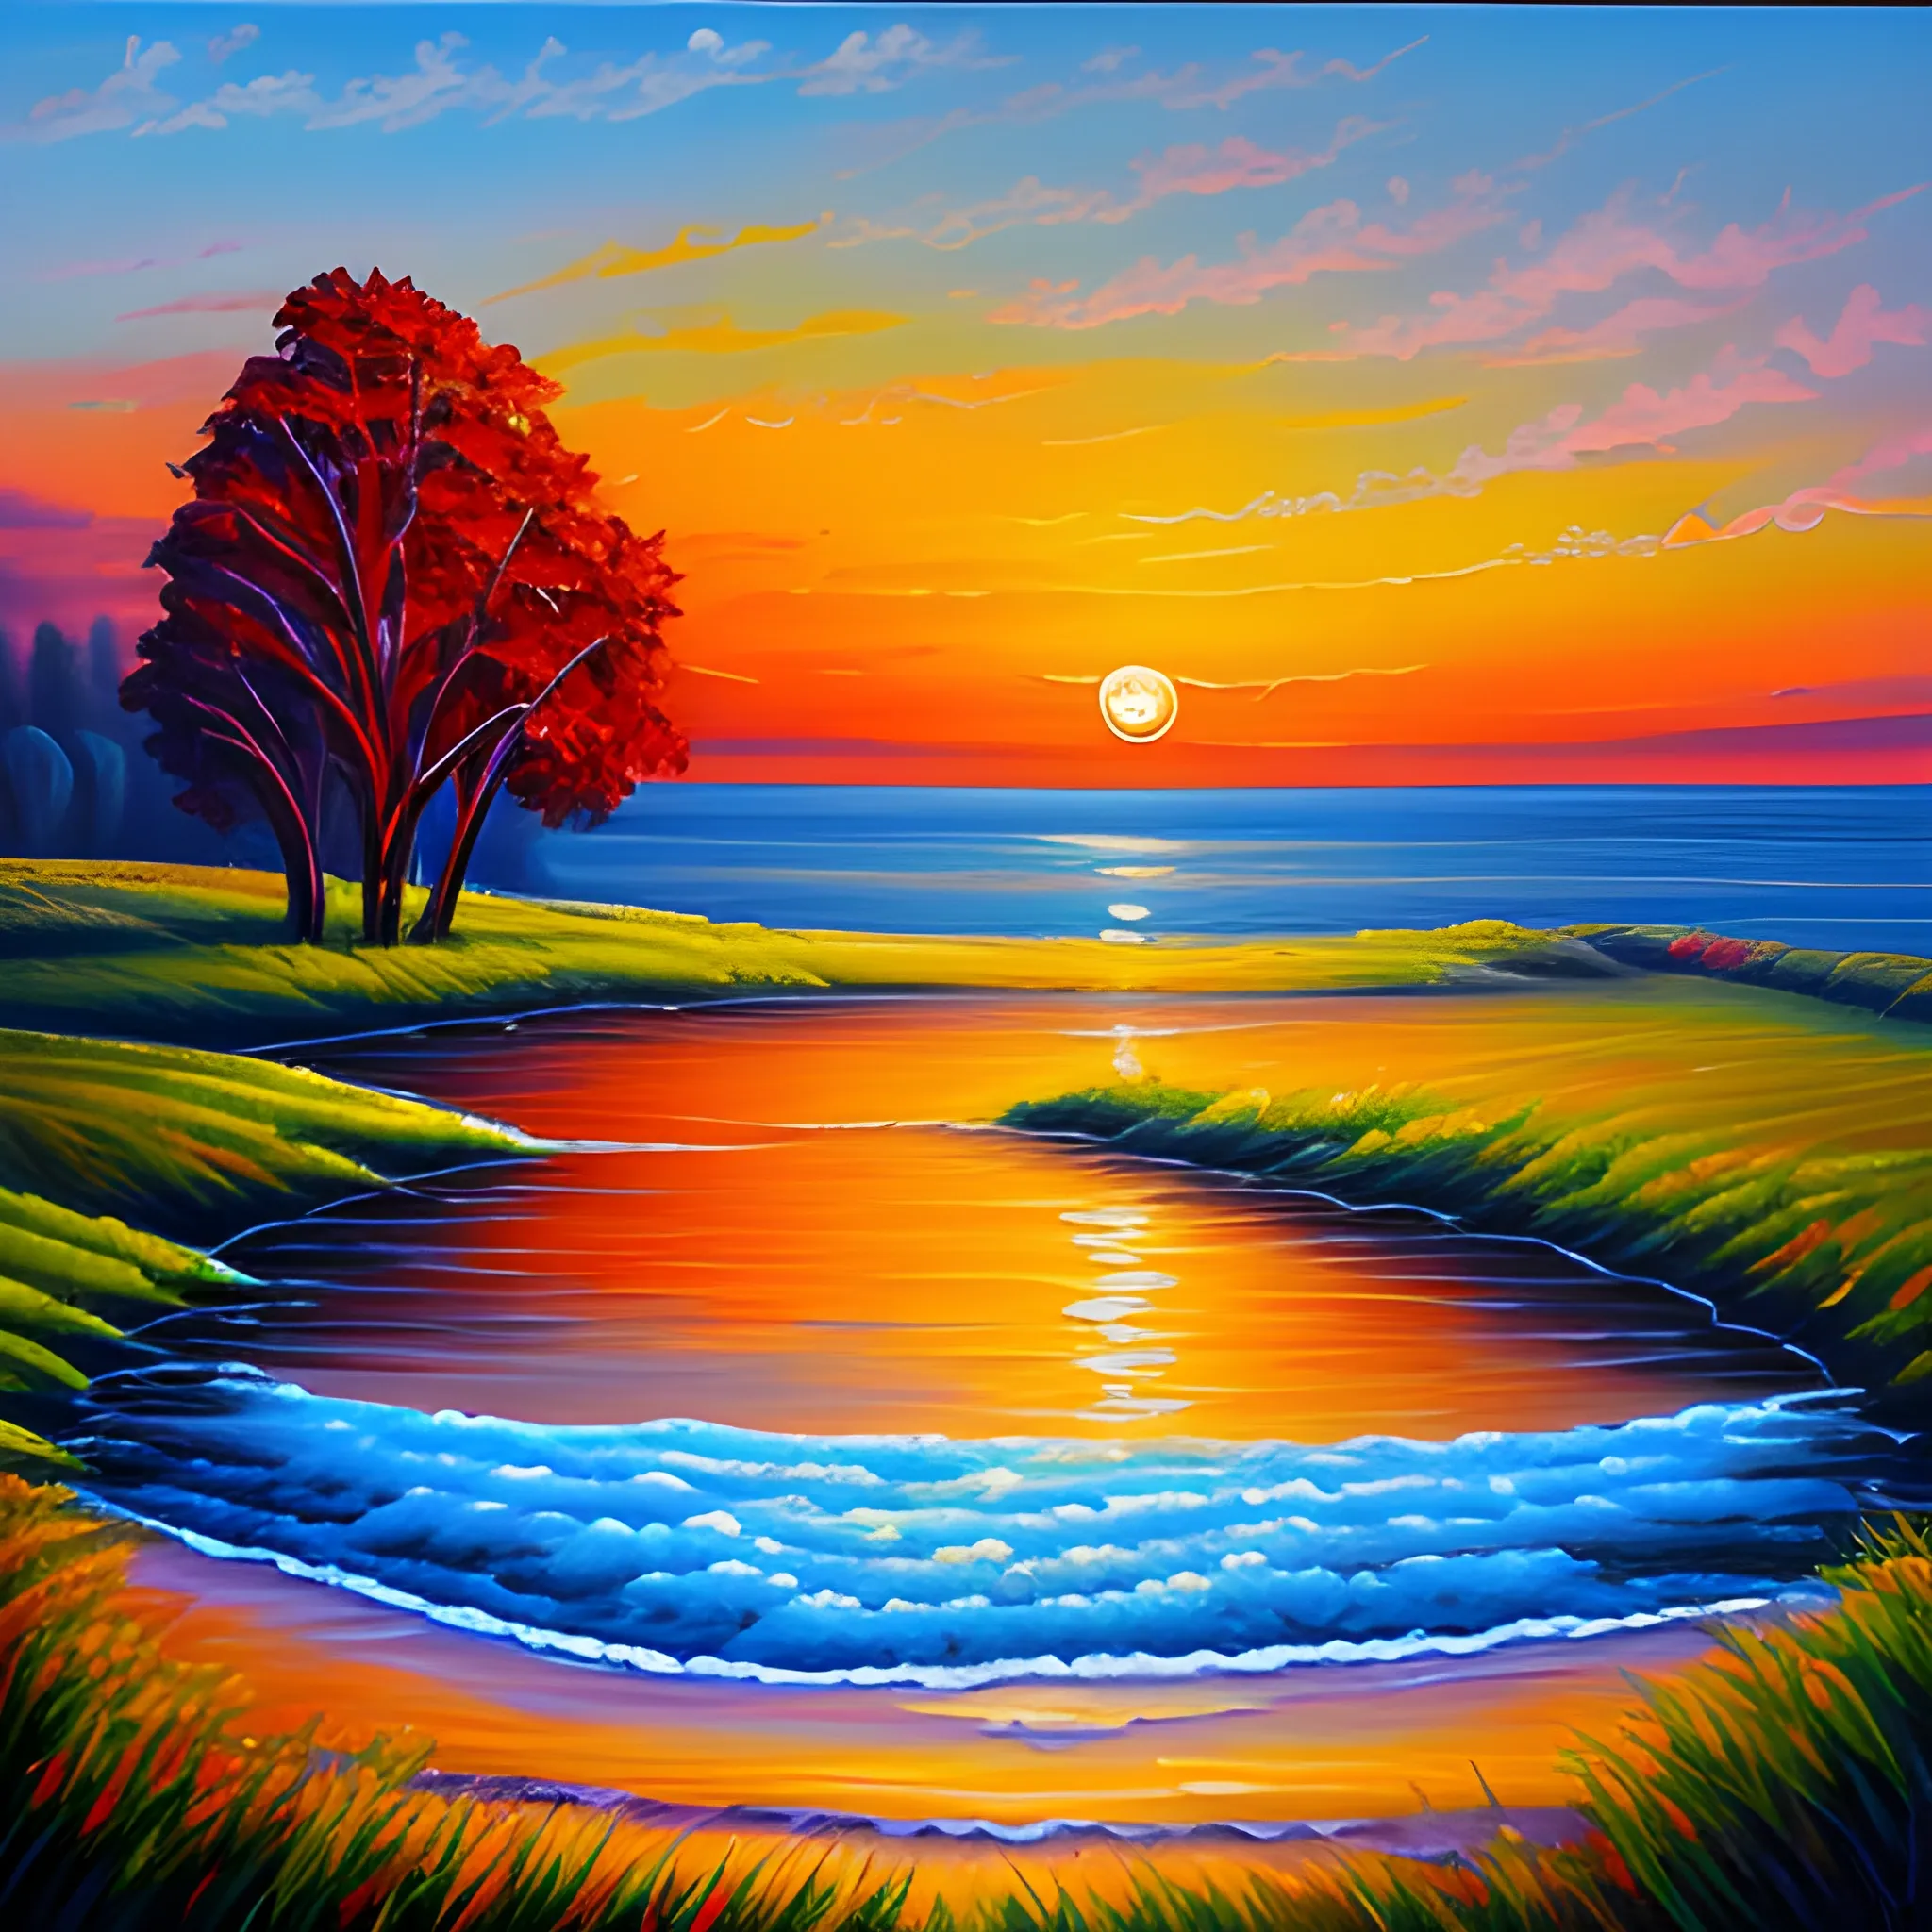 Sunset landscape painting, oil painting style

